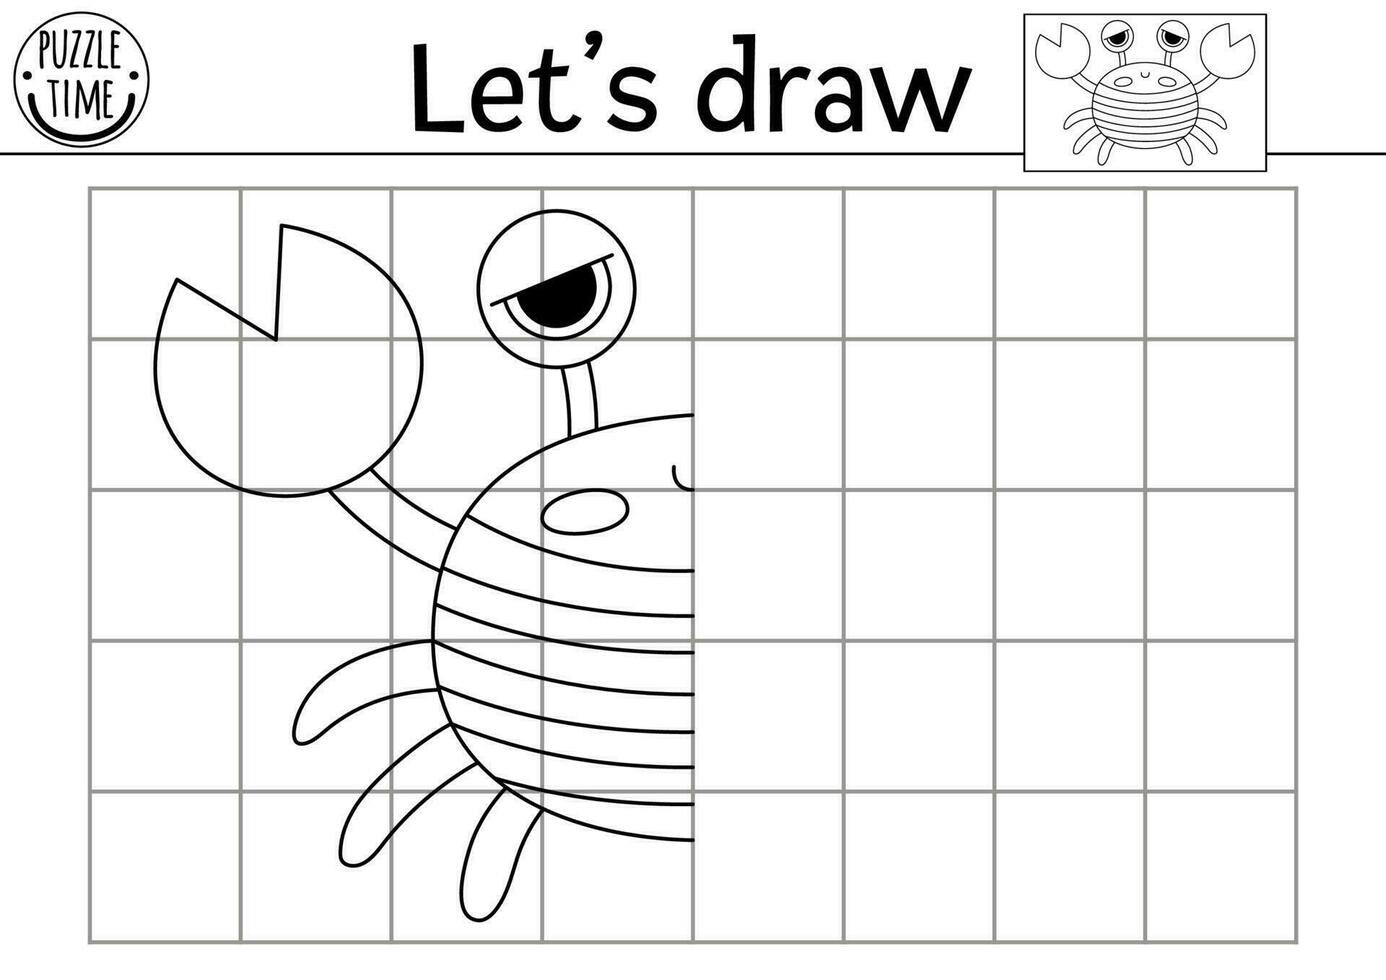 Complete the pirate crab picture. Vector pirate symmetrical drawing practice worksheet. Printable black and white activity for preschool kids. Copy the picture treasure island game with cute animal